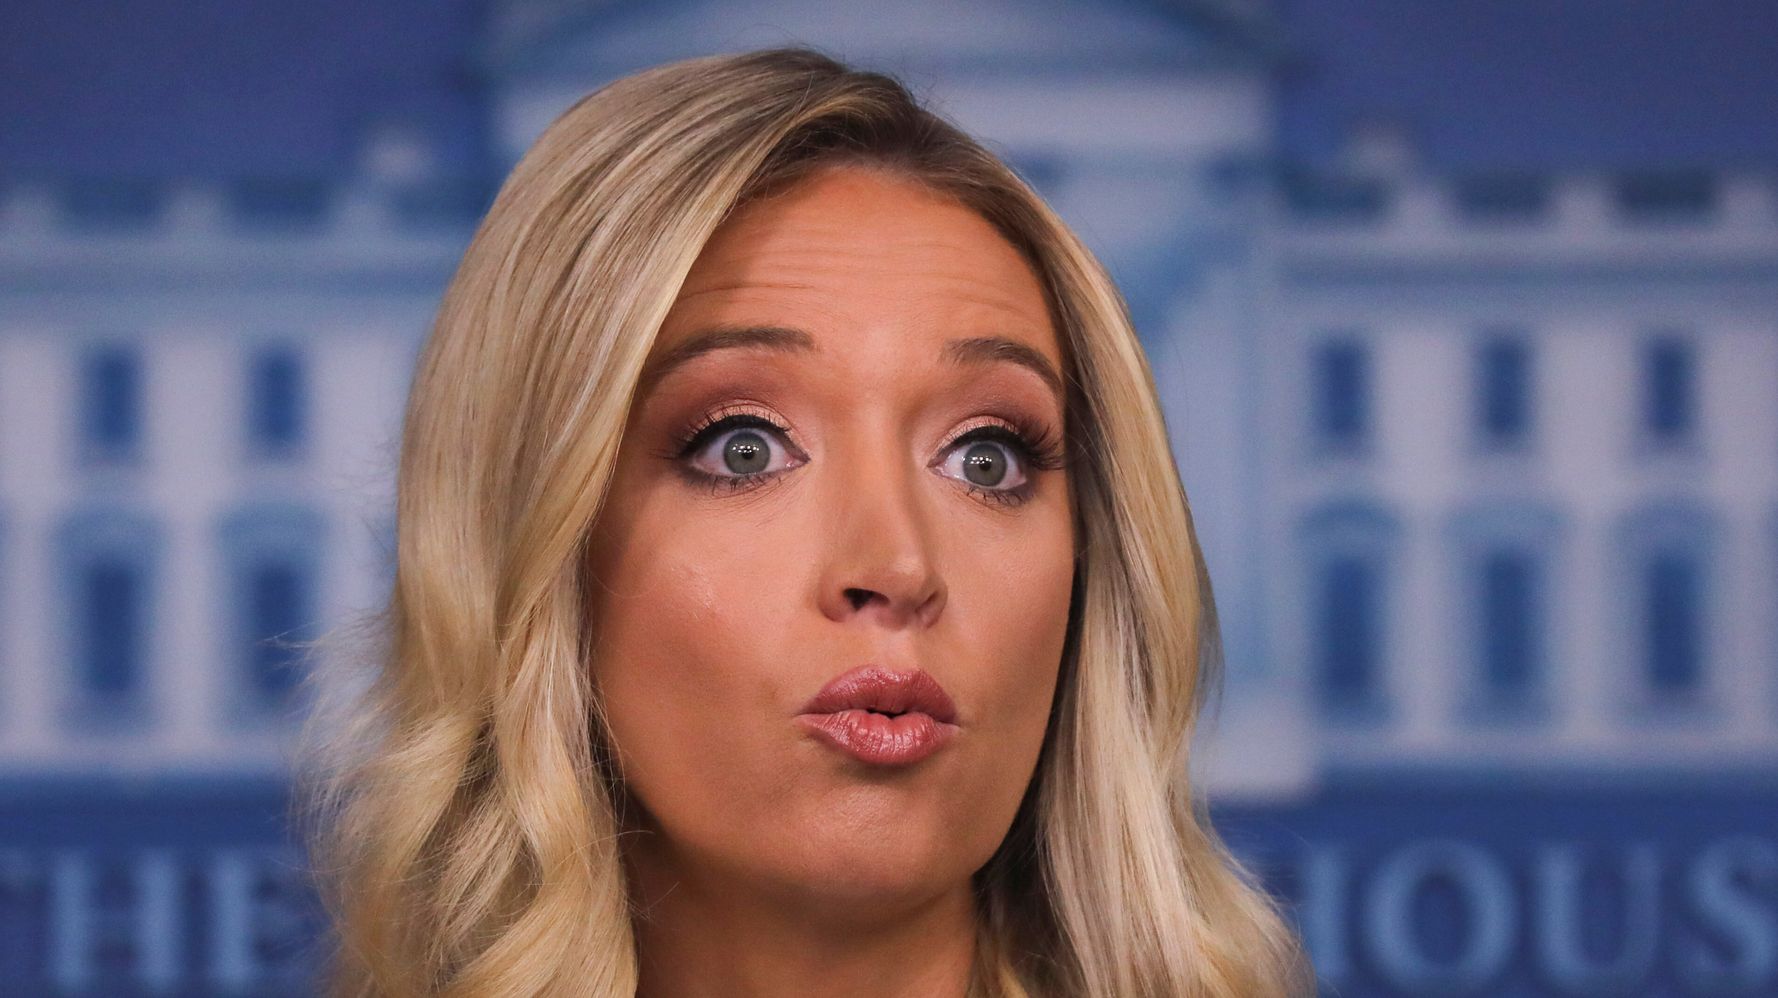 Kayleigh Mcenany Gets Rocked For Tweeting That Prayer Saves Her From 